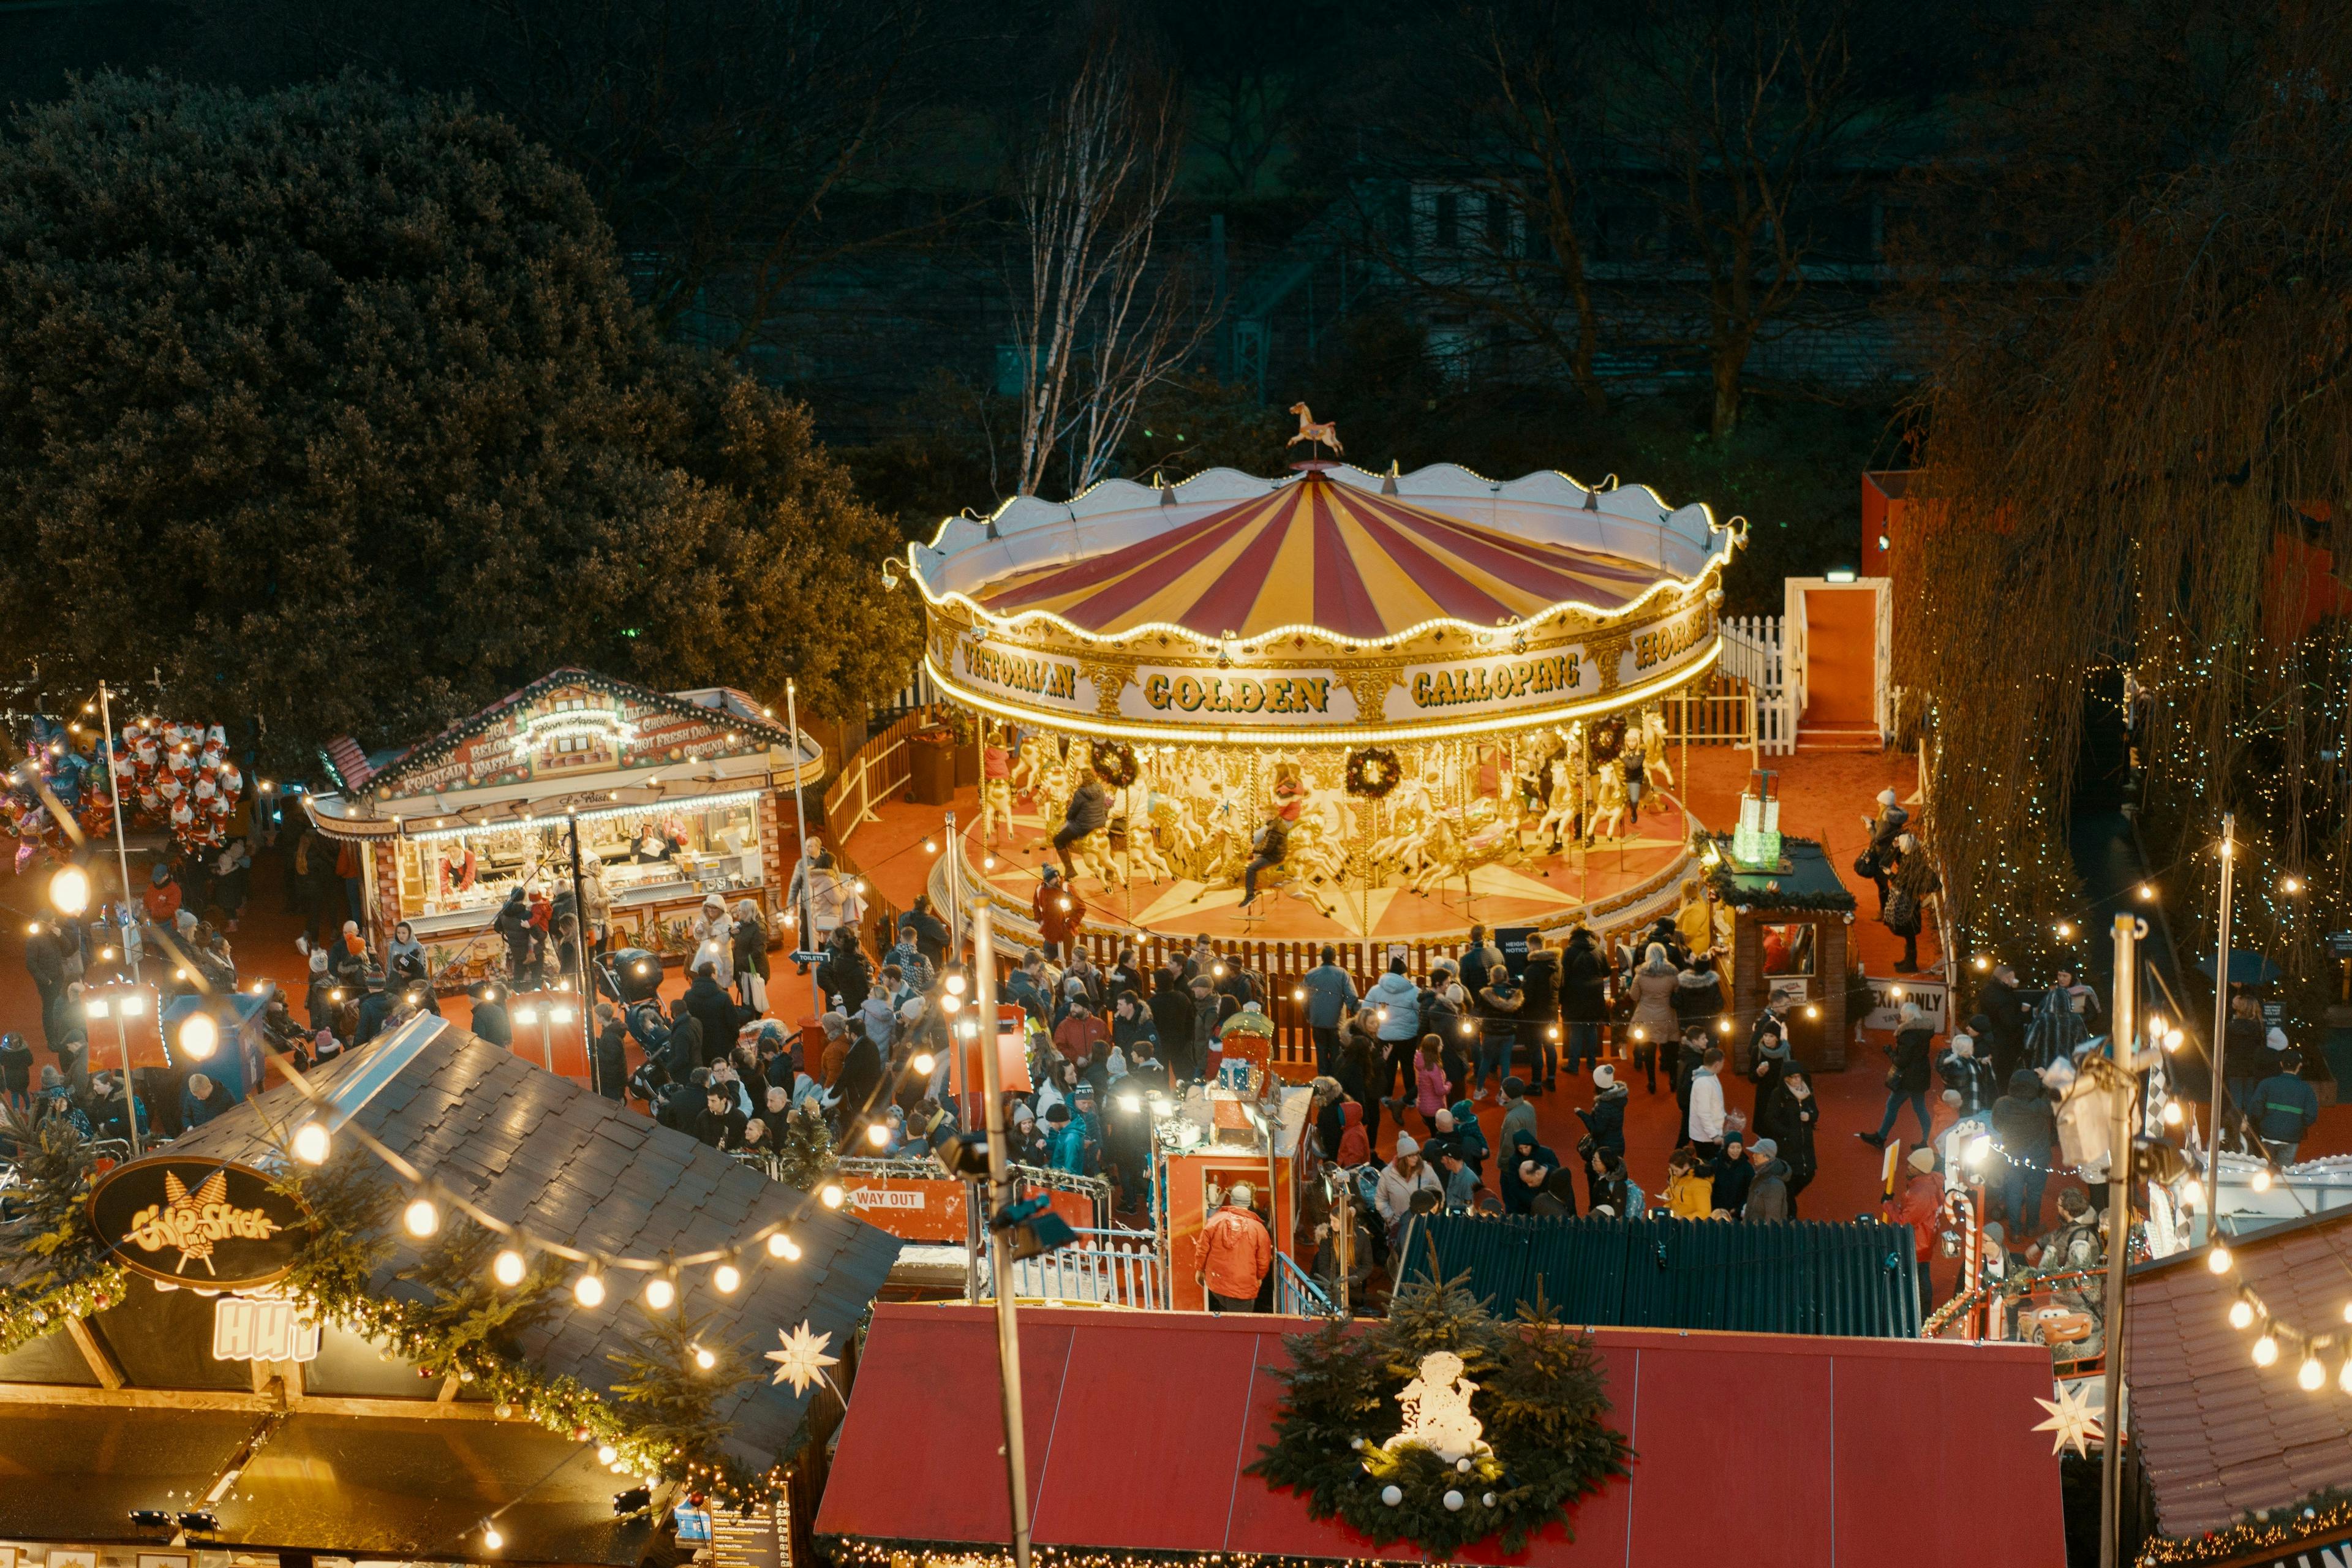 Winterlights 2023 in Luxembourg: schedule, fairs, events